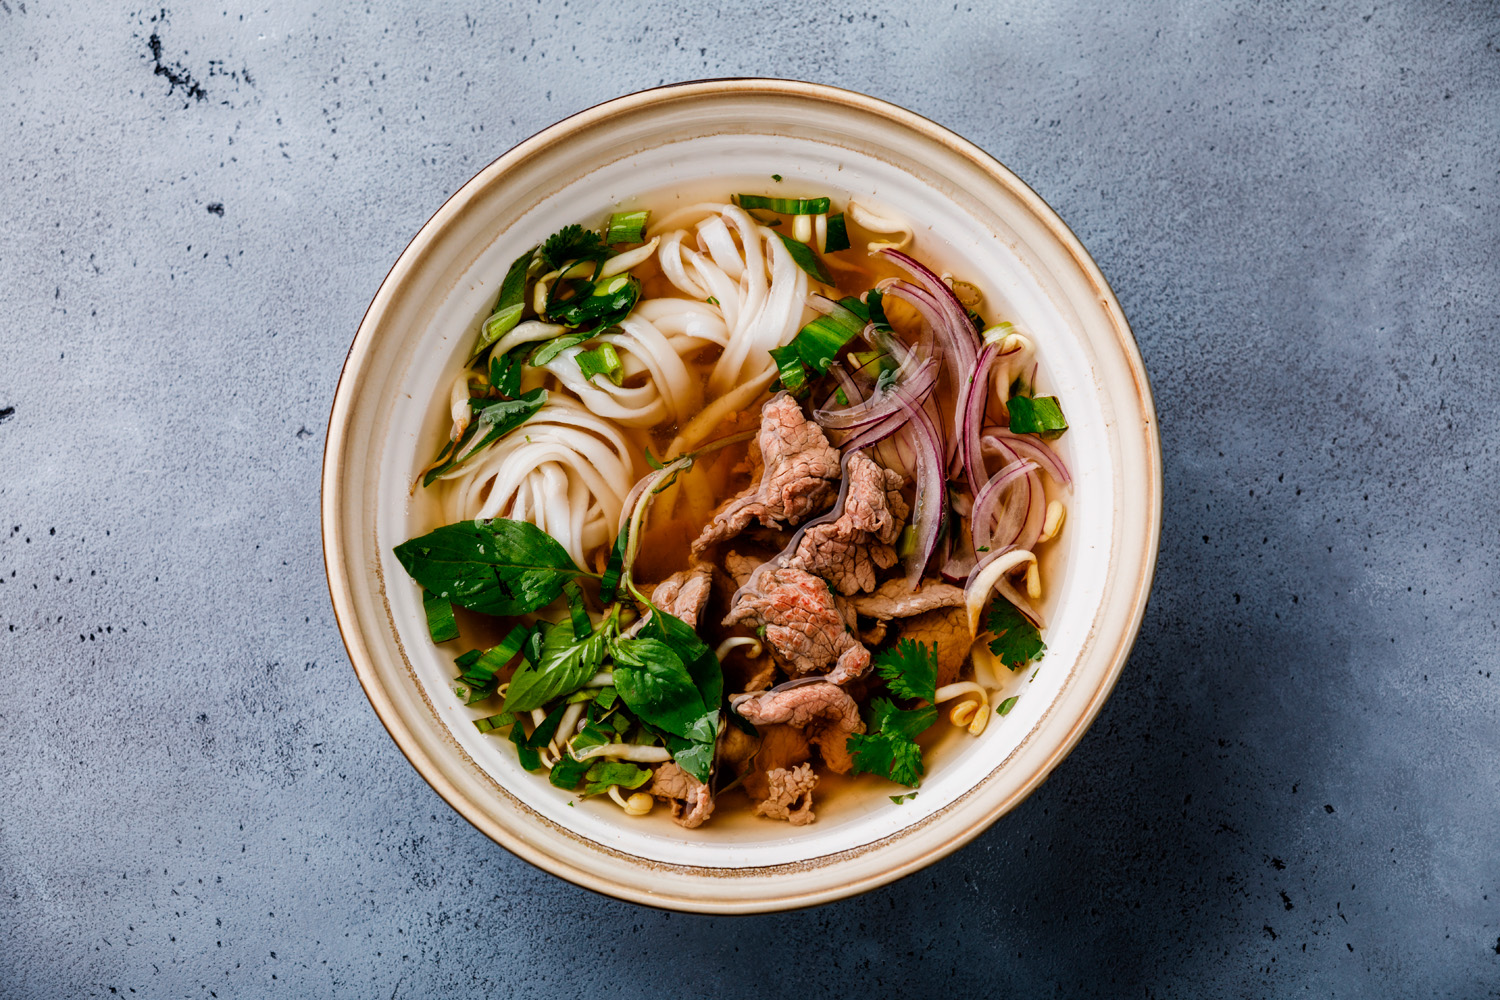 Pho Bo vietnamese Soup with beef in bowl on concrete background on our daily blog Southeast Asian Food Vietnamese Pantry Staples our blog stories